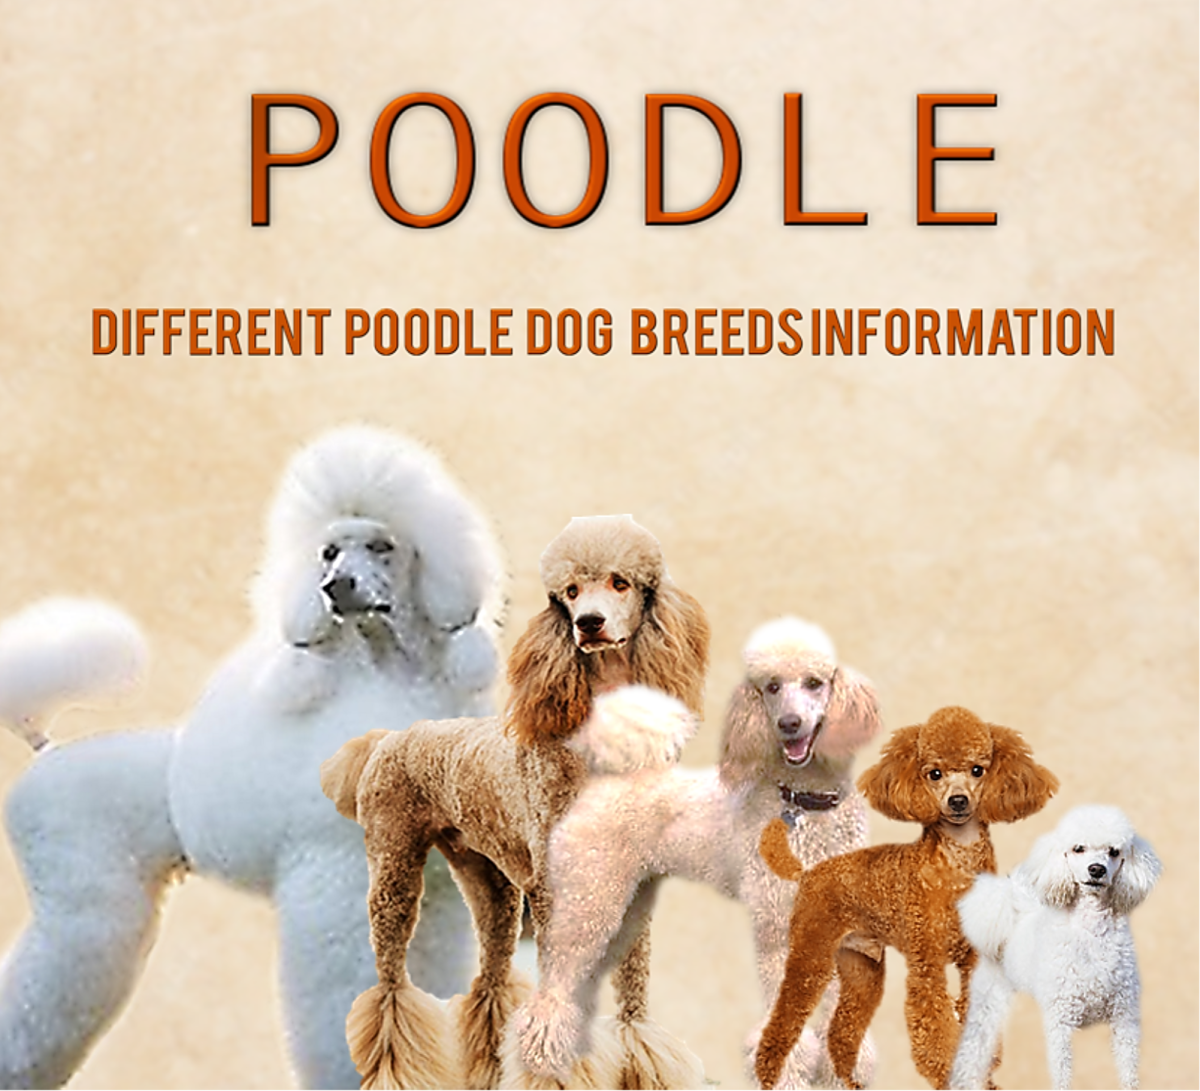 Different Types of Poodle Dog Breed Information, Pictures & Characteristics